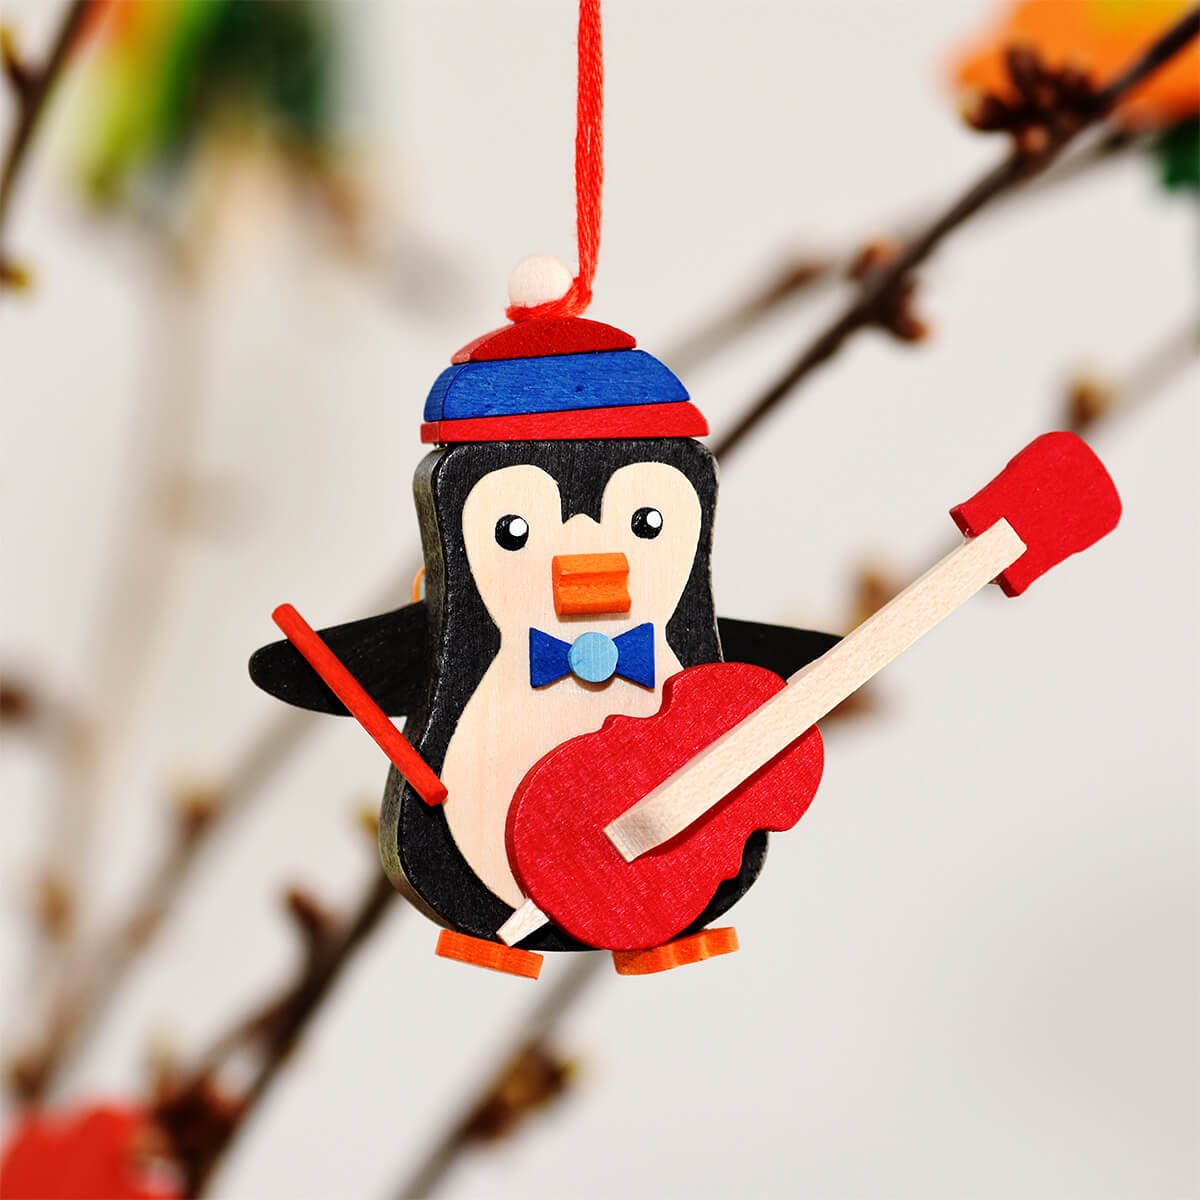 Penguin Ornament with trumpet